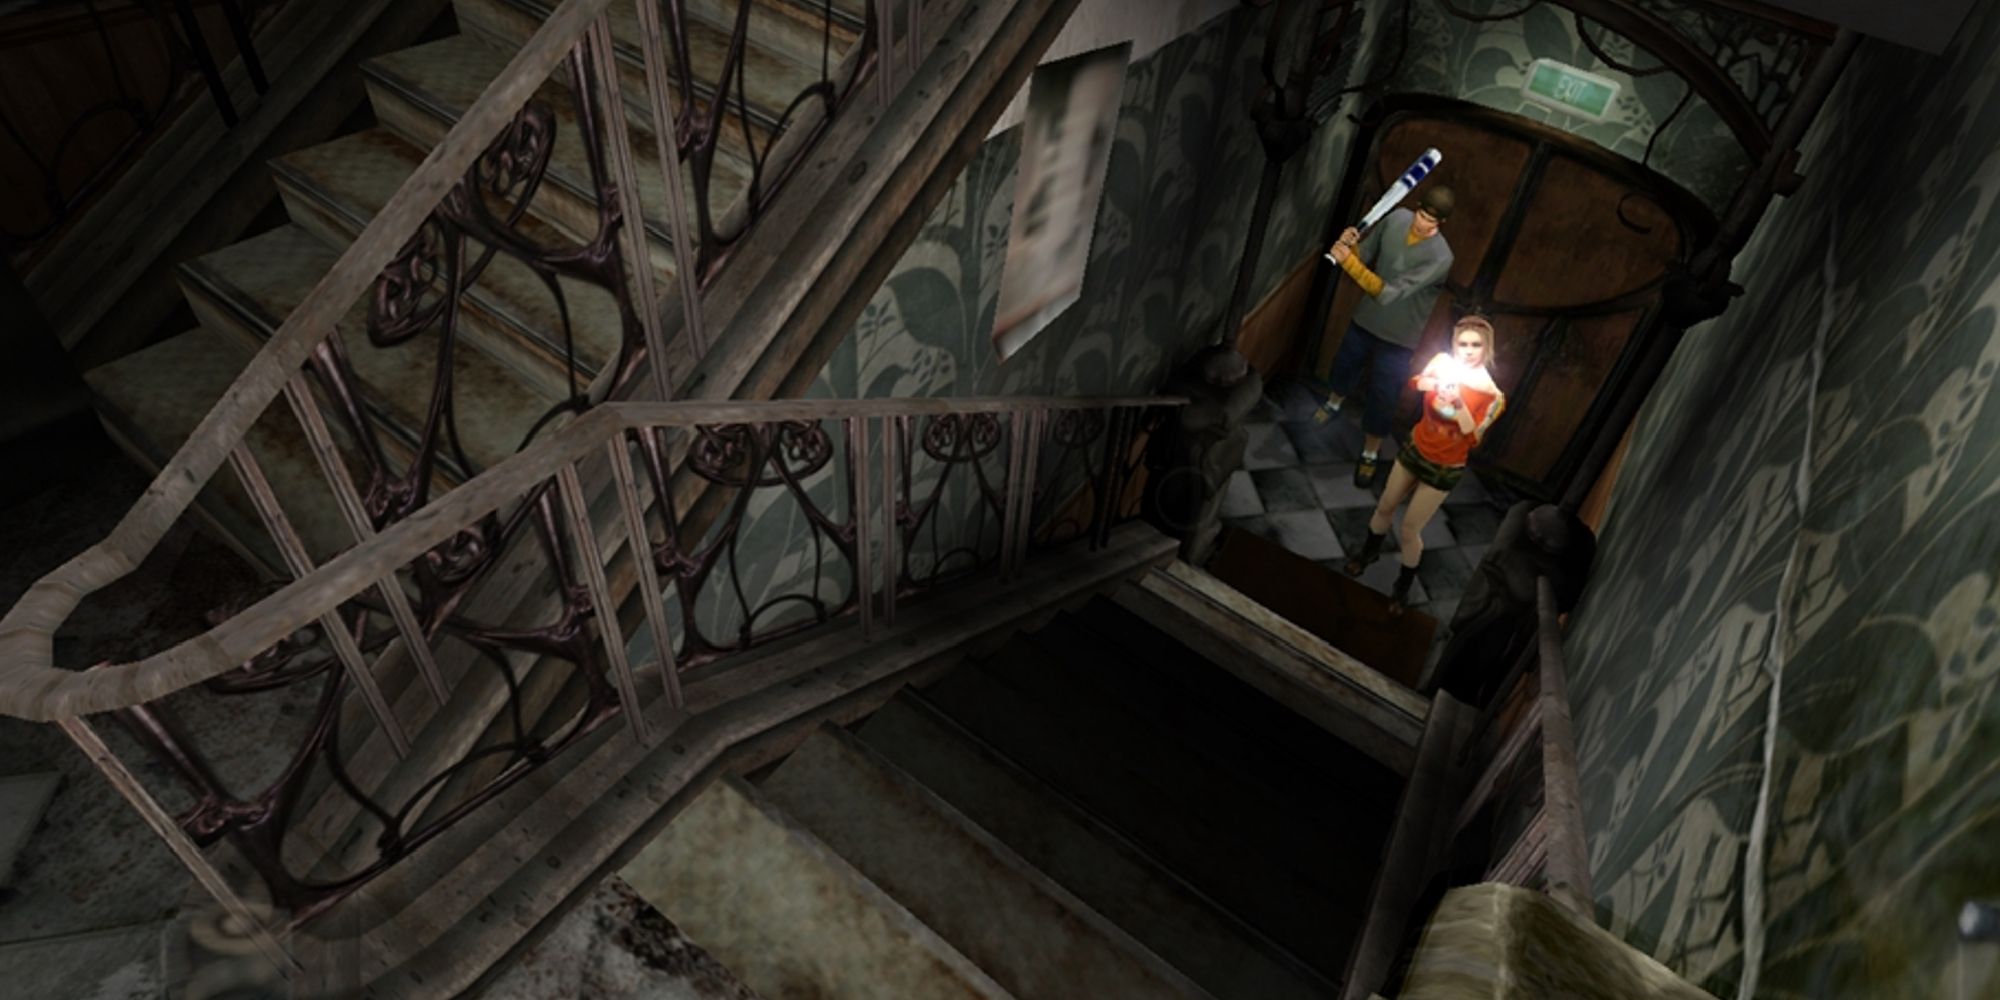 Two armed characters peering up the stairwell of an eerie, abandoned building.